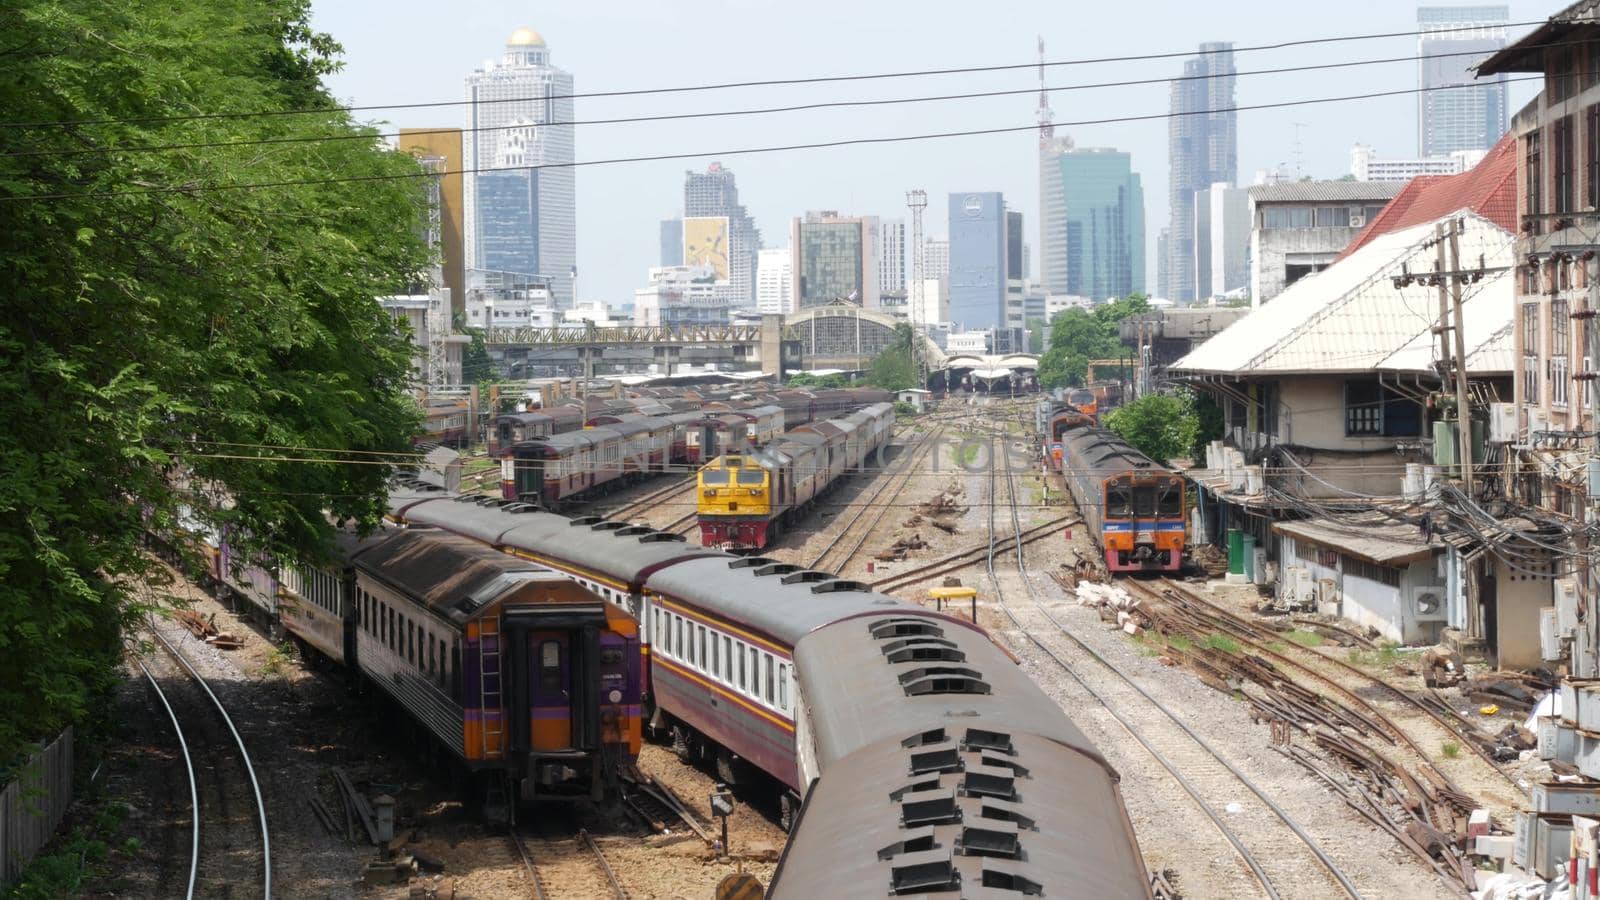 BANGKOK, THAILAND - 11 JULY, 2019: View of the train station against the backdrop of the cityscape and skyscrapers. Hua Lamphong is the hub of public transportation. State railway transport in Siam. by DogoraSun